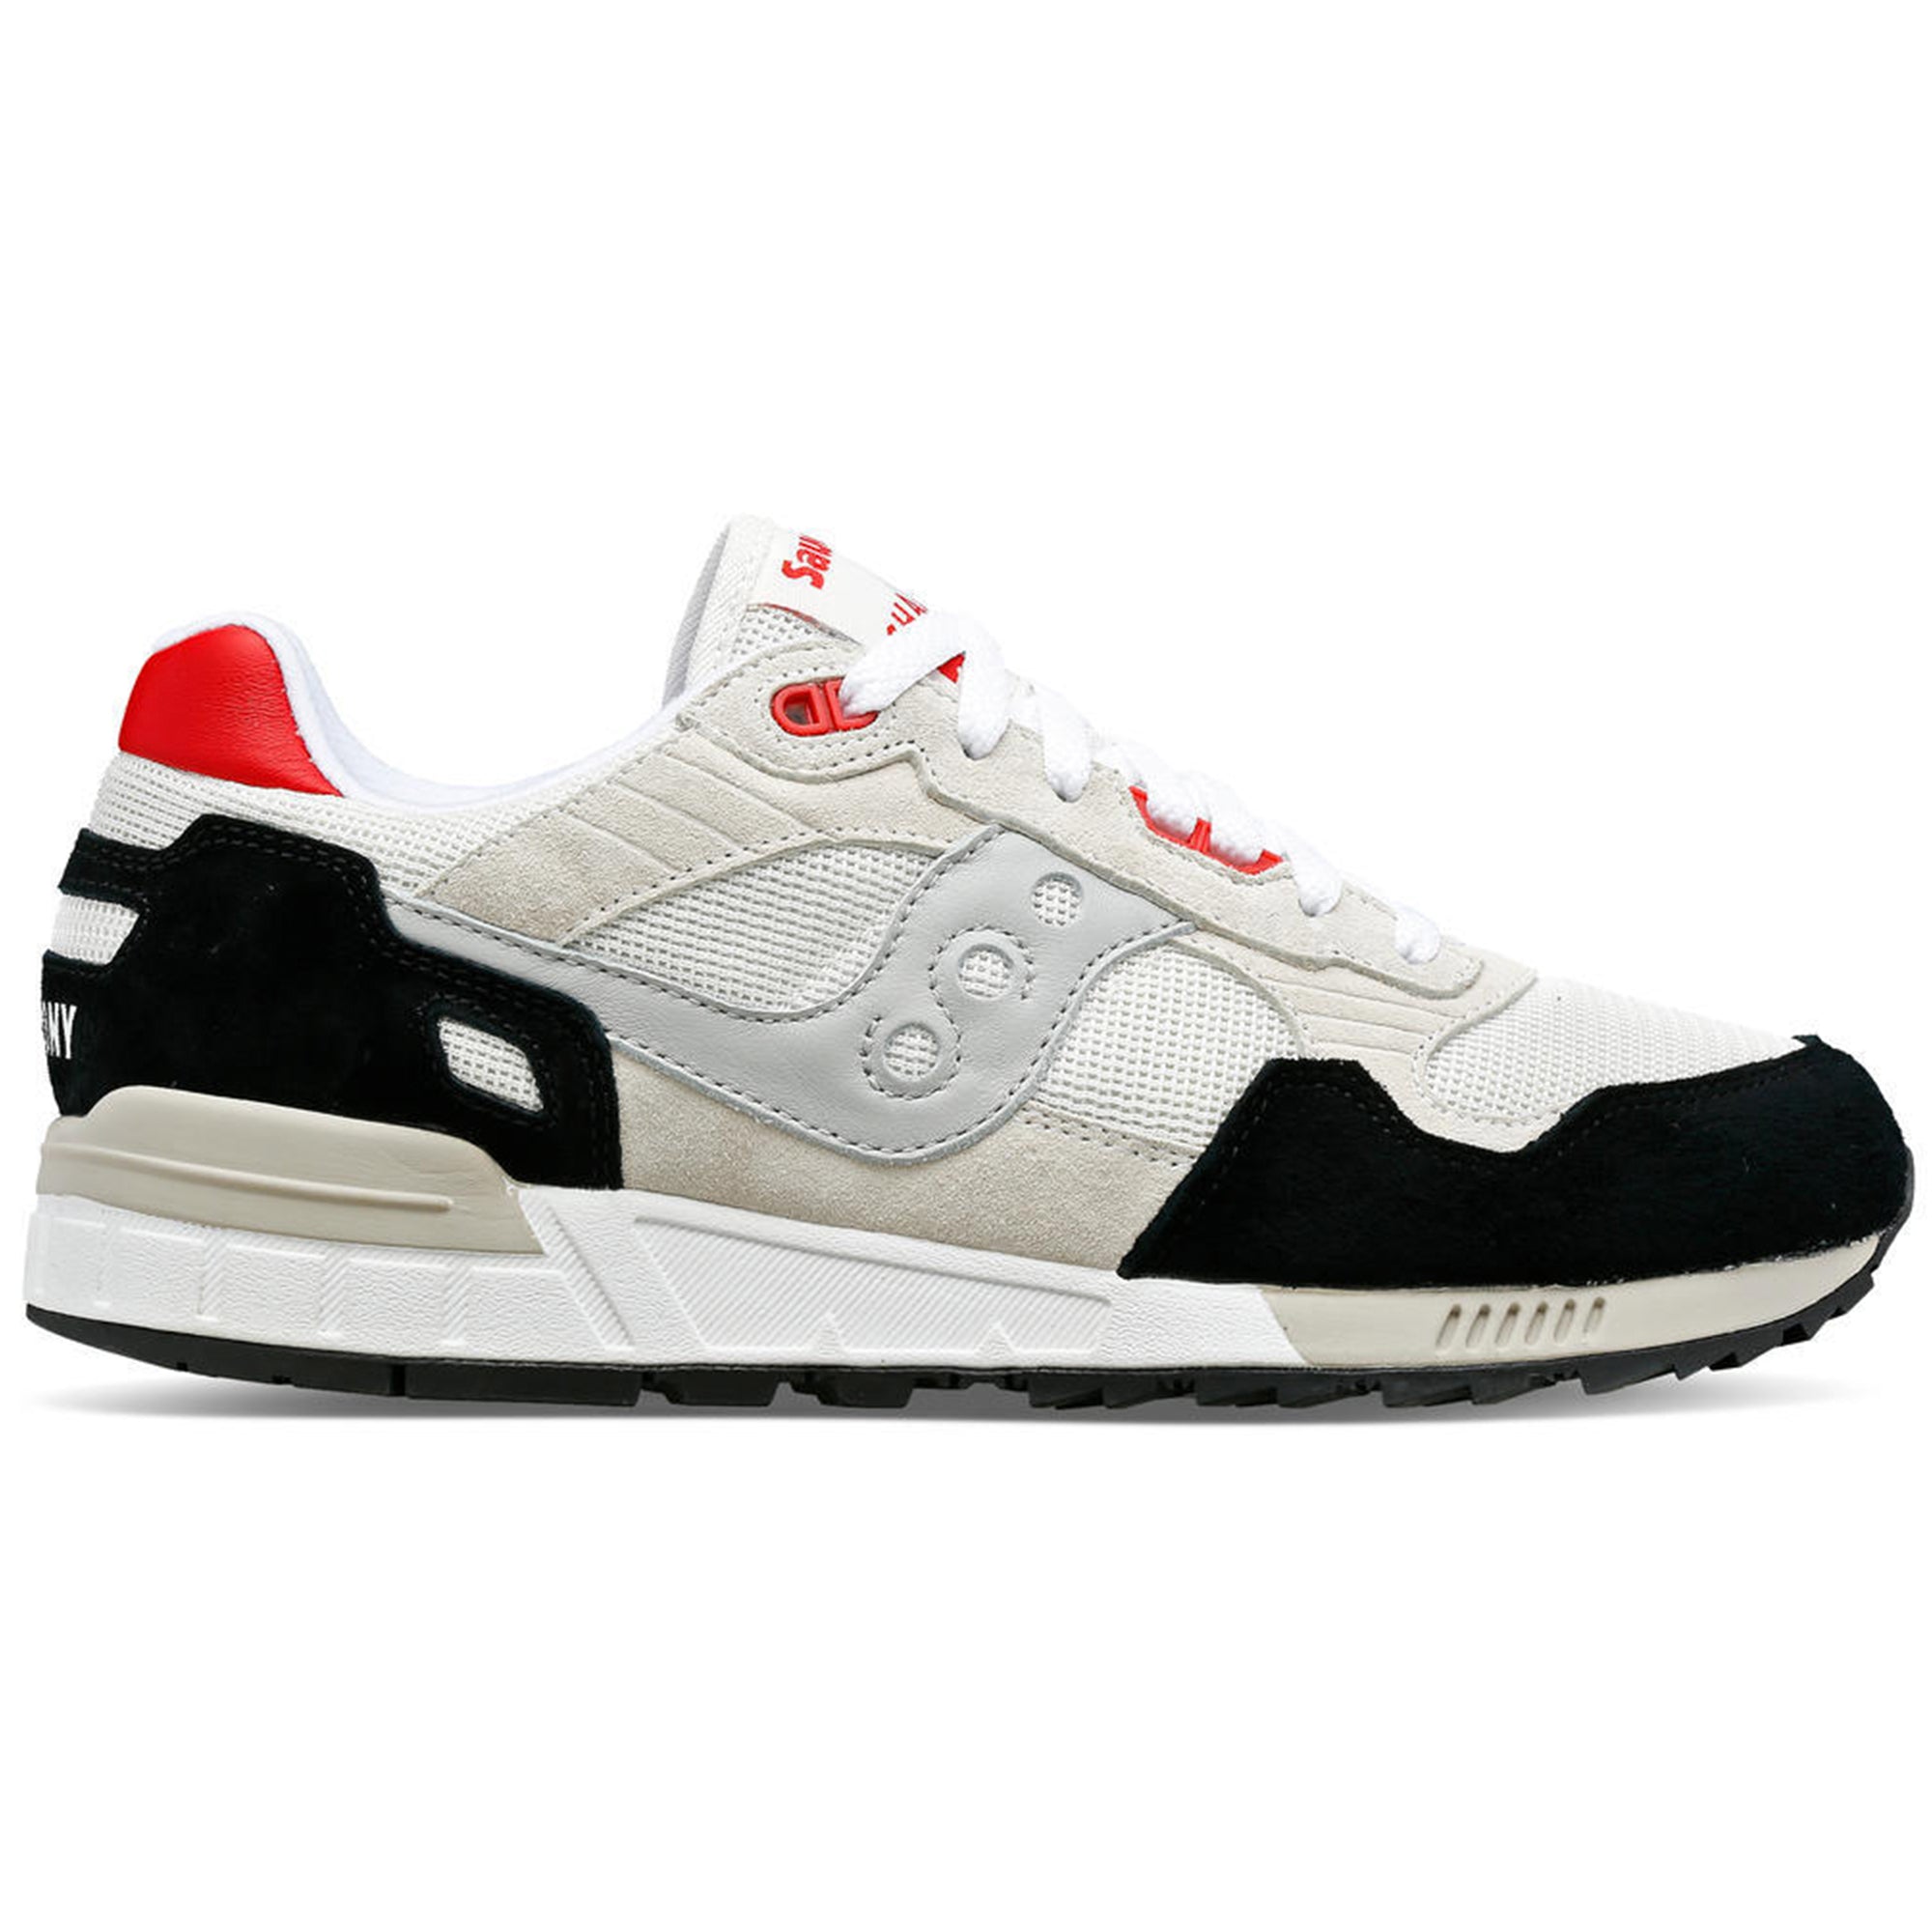 Saucony Shadow 5000 Trainers - White/Black/Red